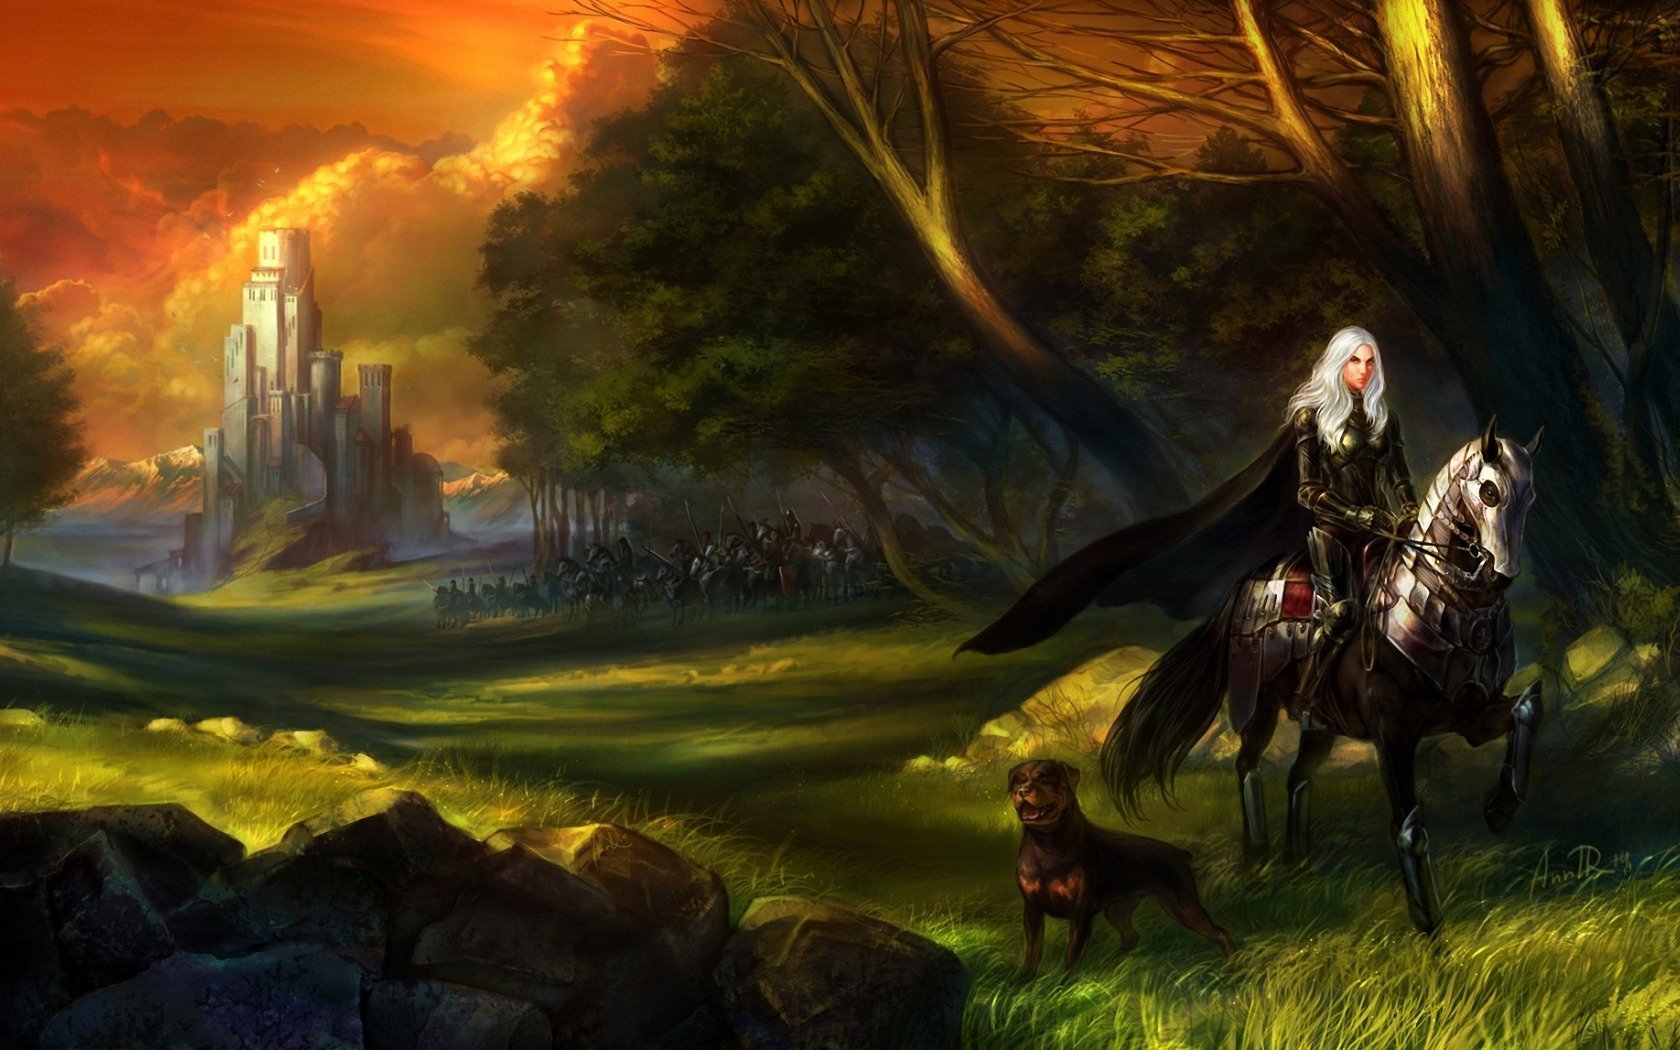 art, Castle, Girl, Rider, The, Horse, Dog, Army, Grass, Rocks, Forest Wallpaper